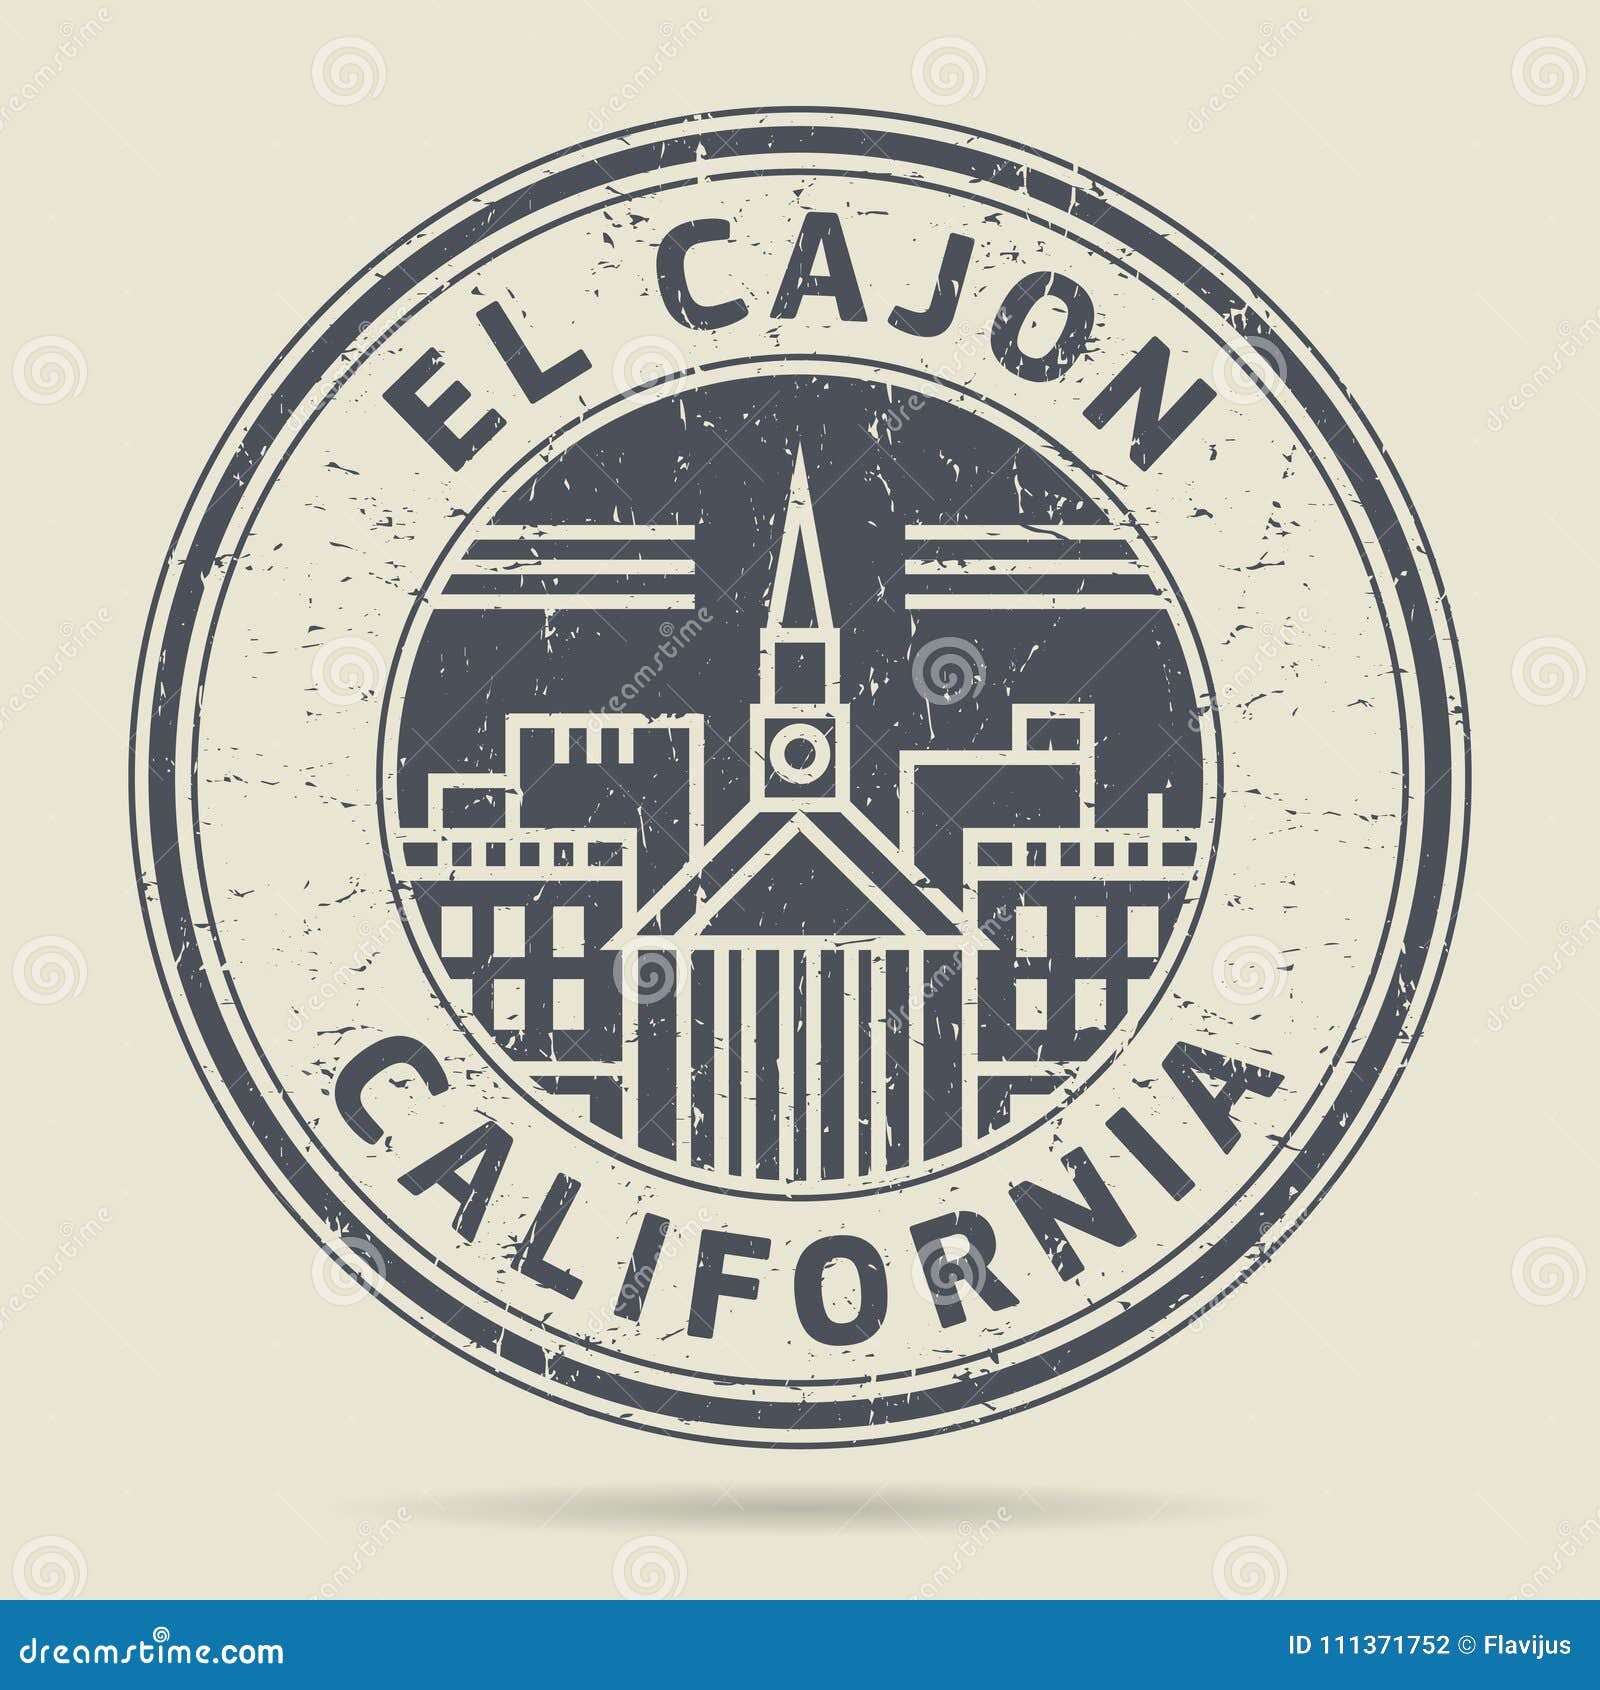 grunge rubber stamp or label with text el cajon, california